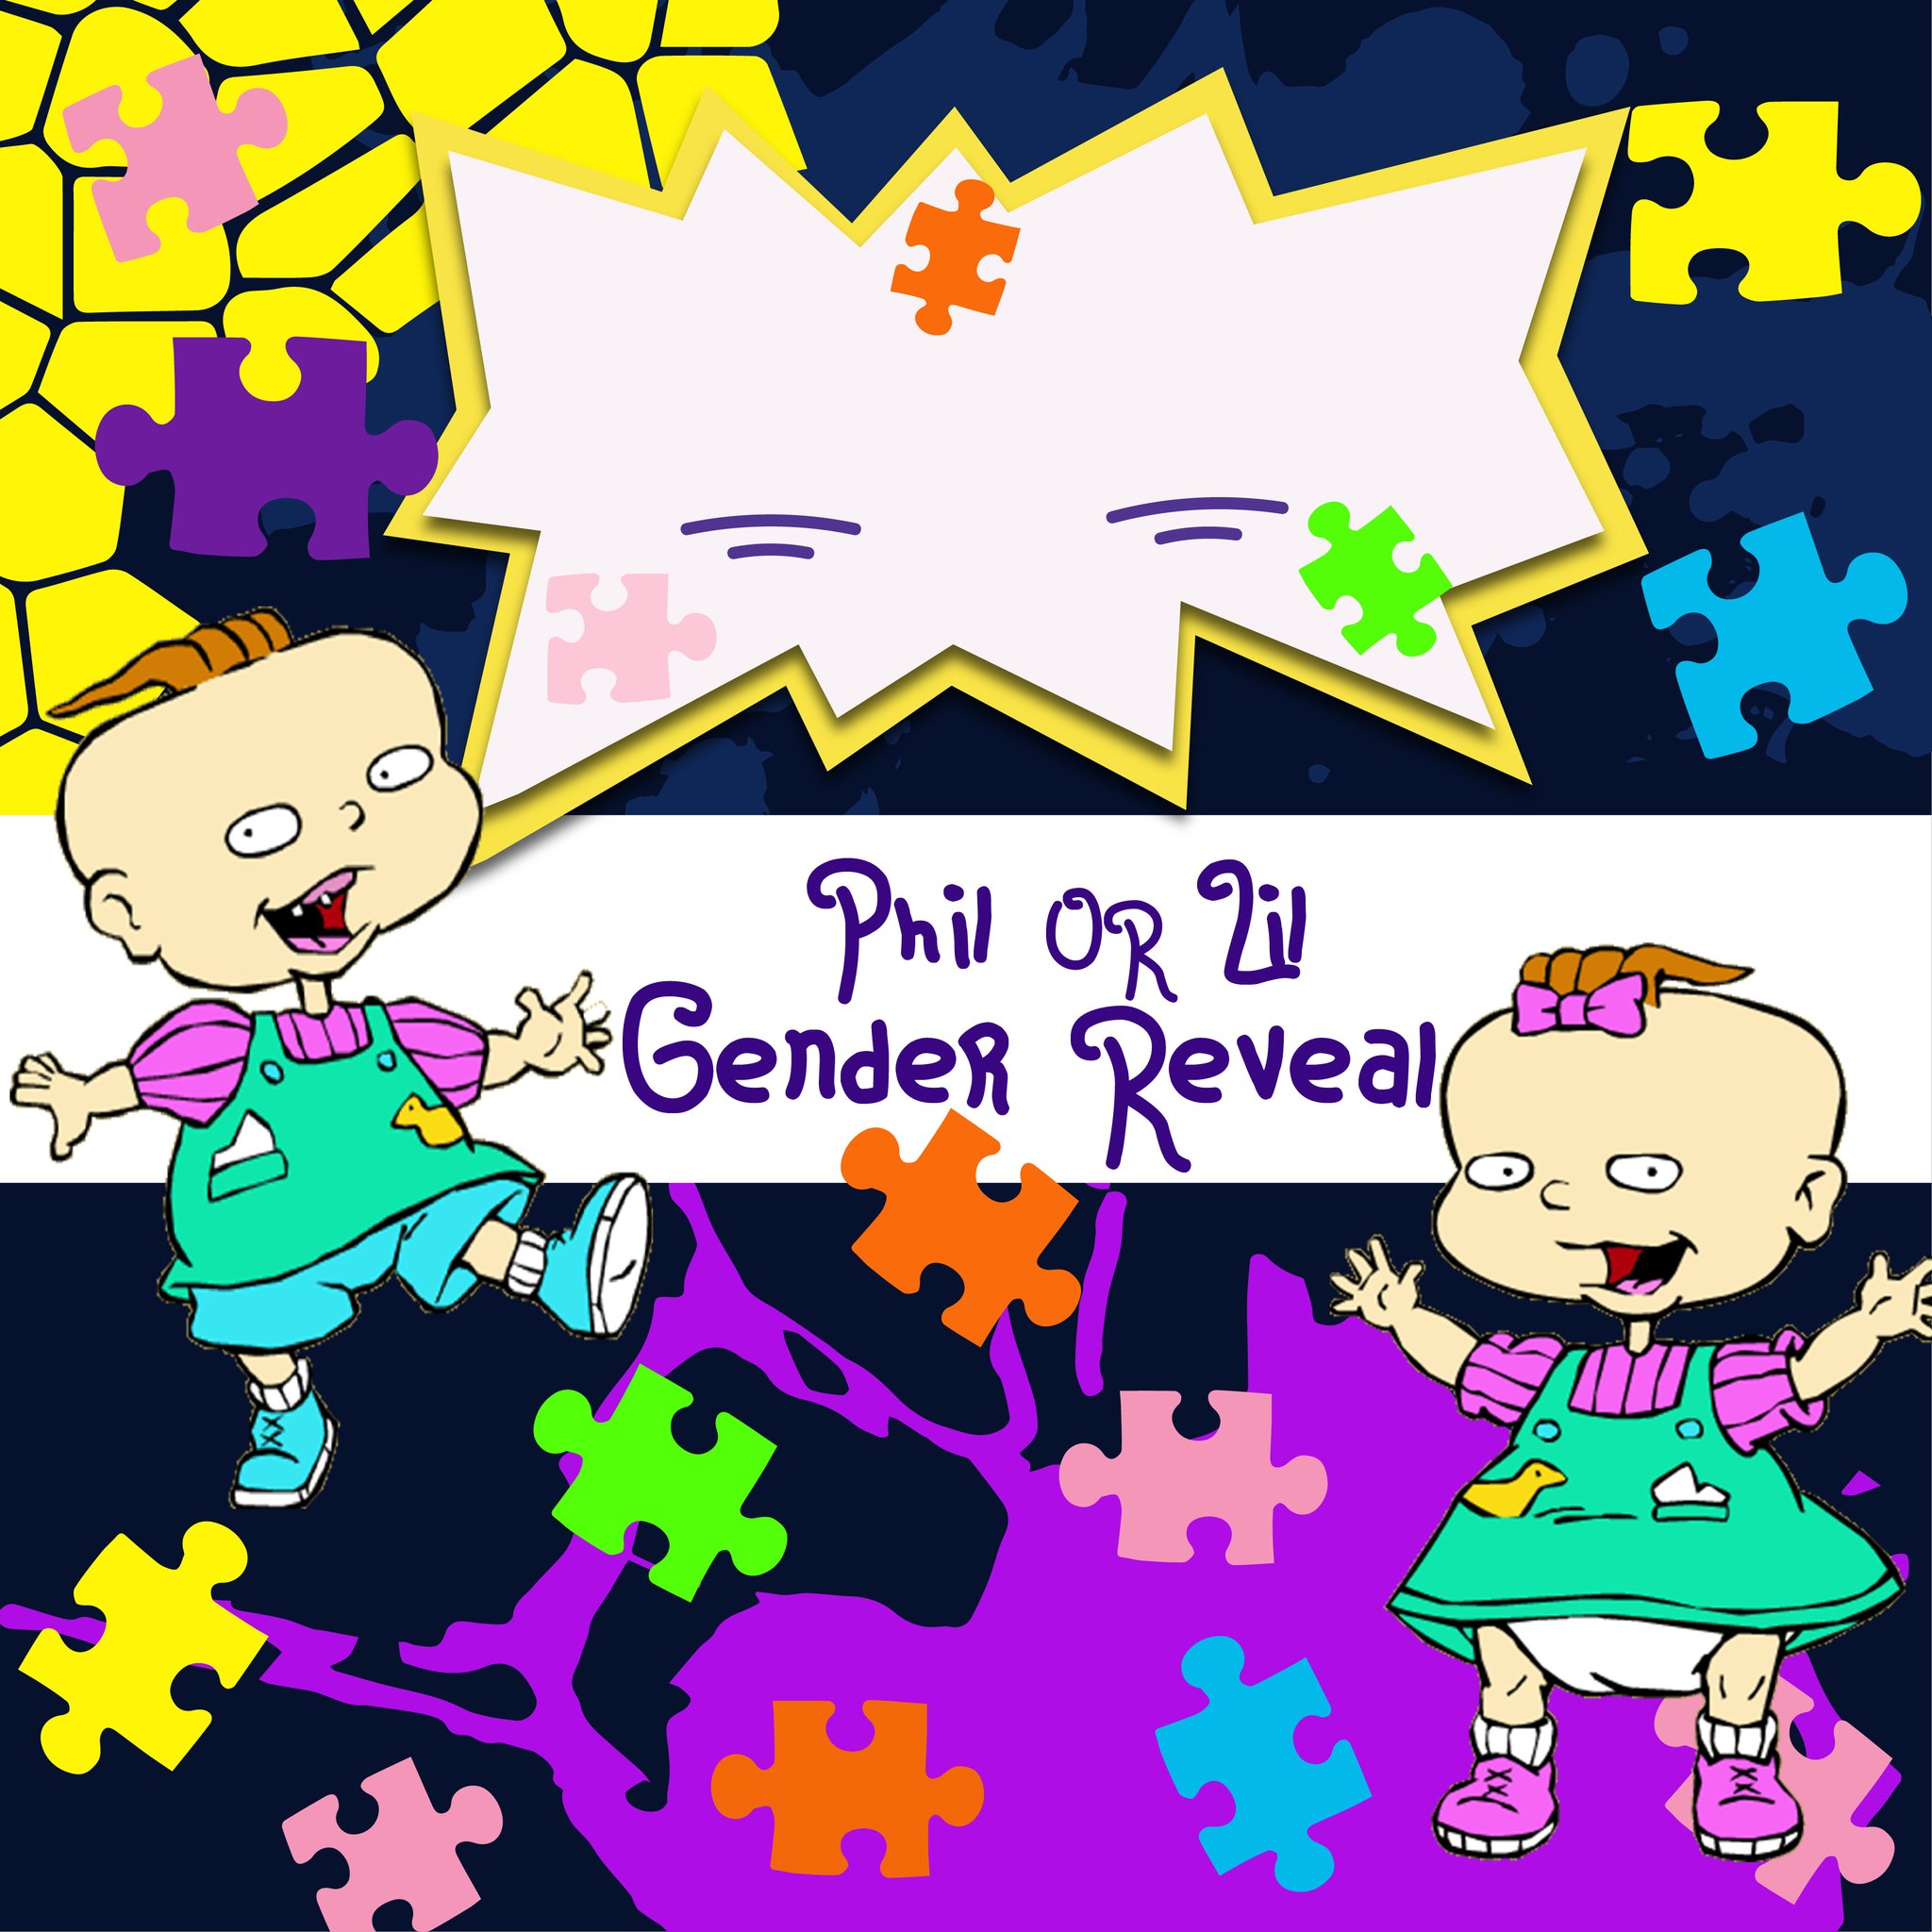 Rugrats Phil or Lil African American Gender Reveal Backdrop.